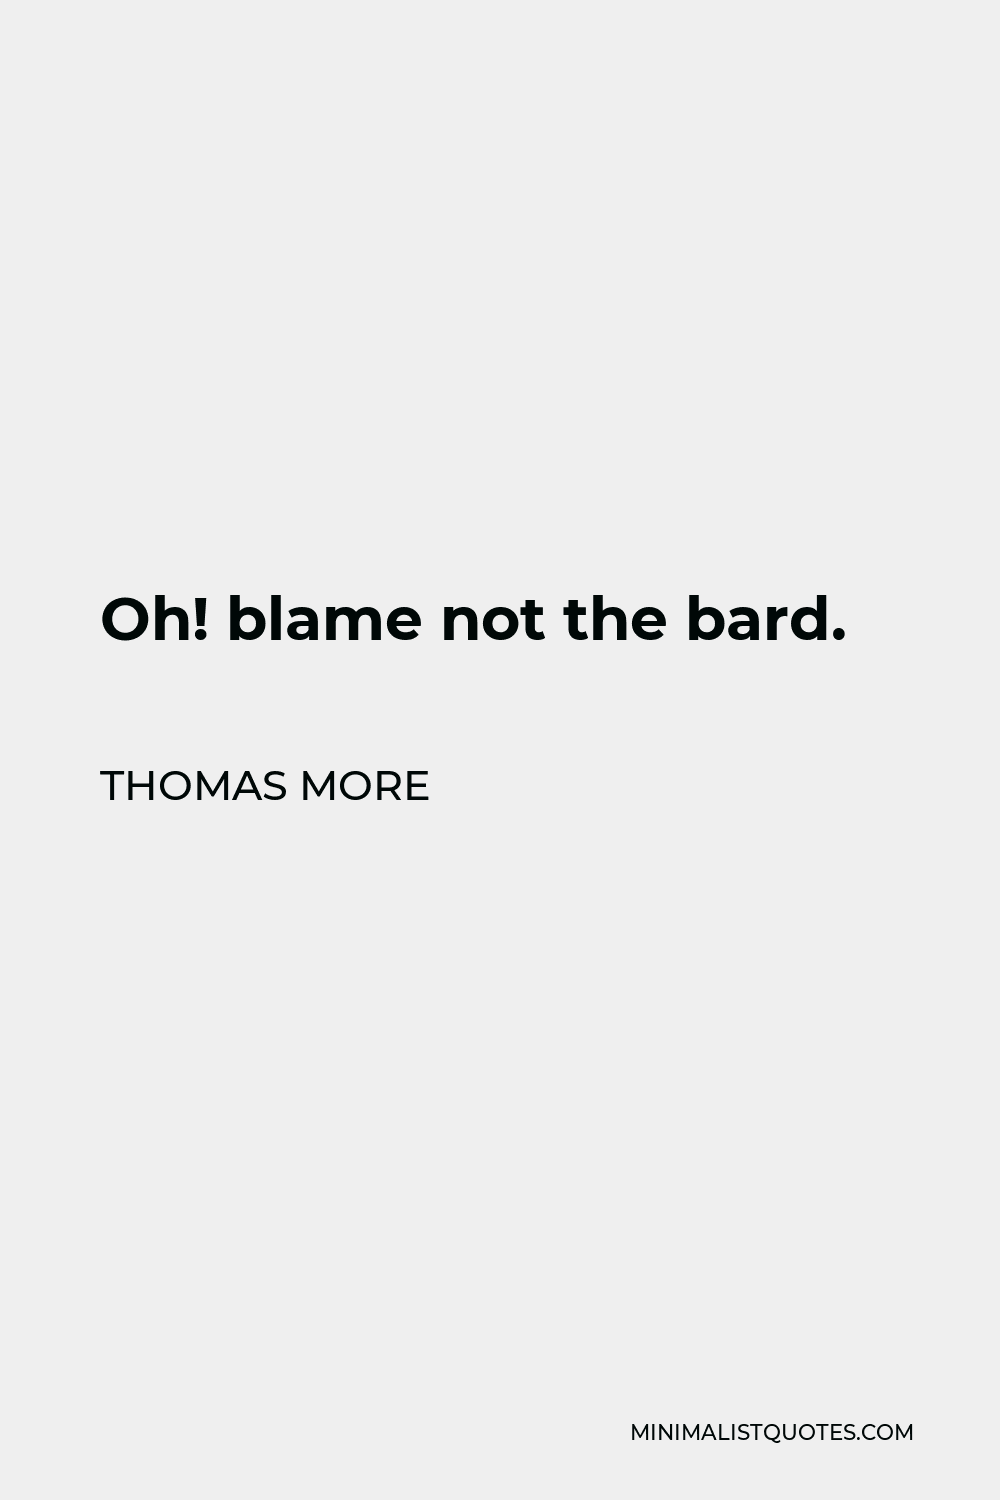 Thomas More Quote - Oh! blame not the bard.